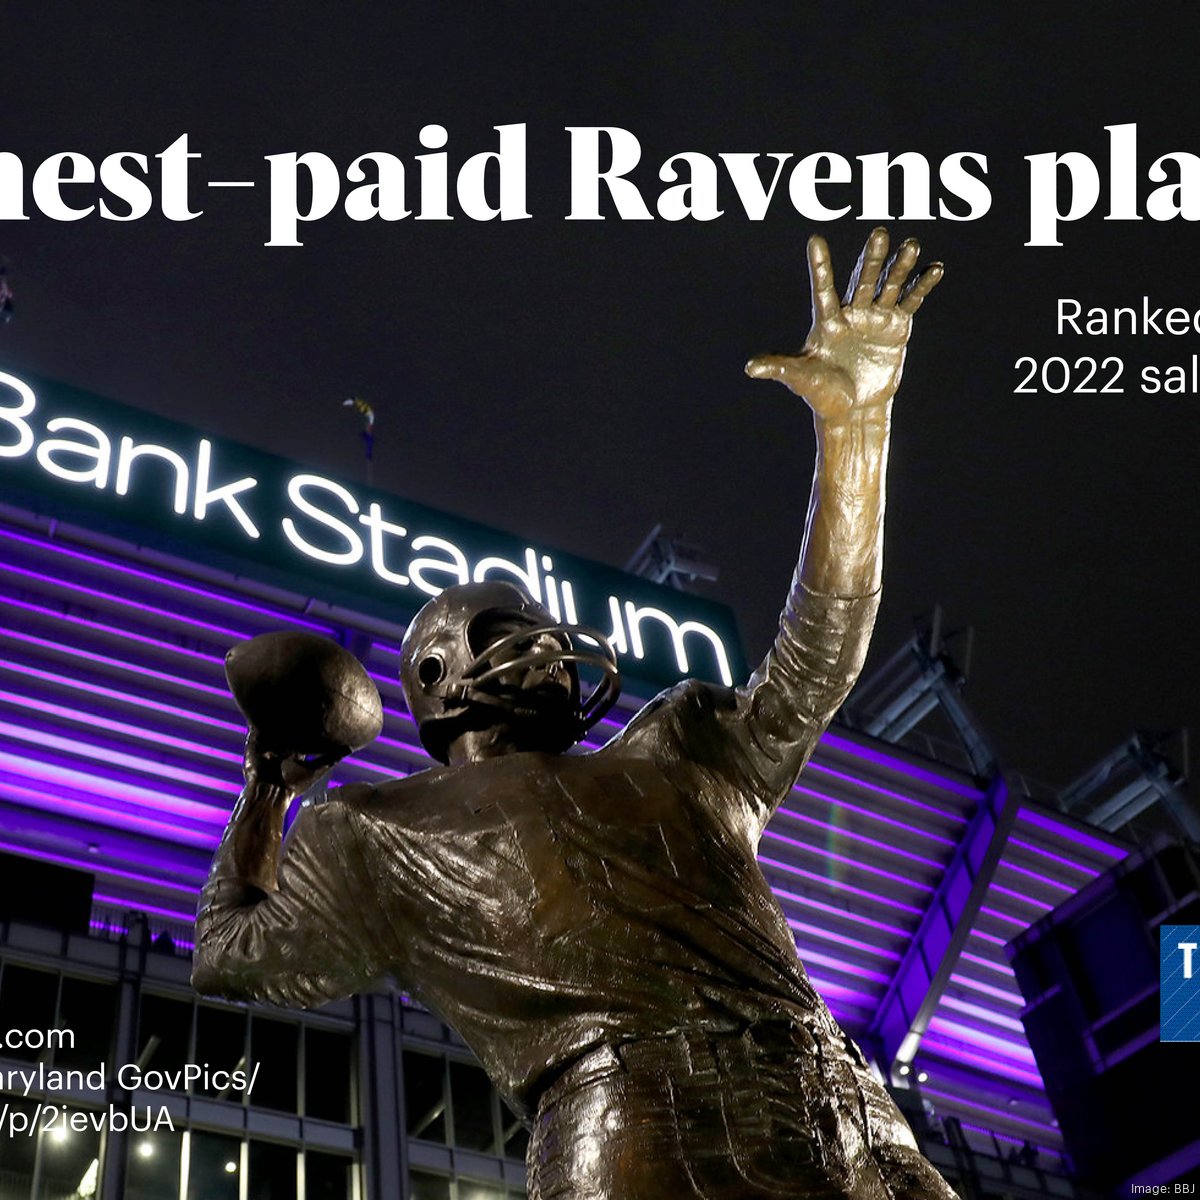 ravens tickets for sale 2022